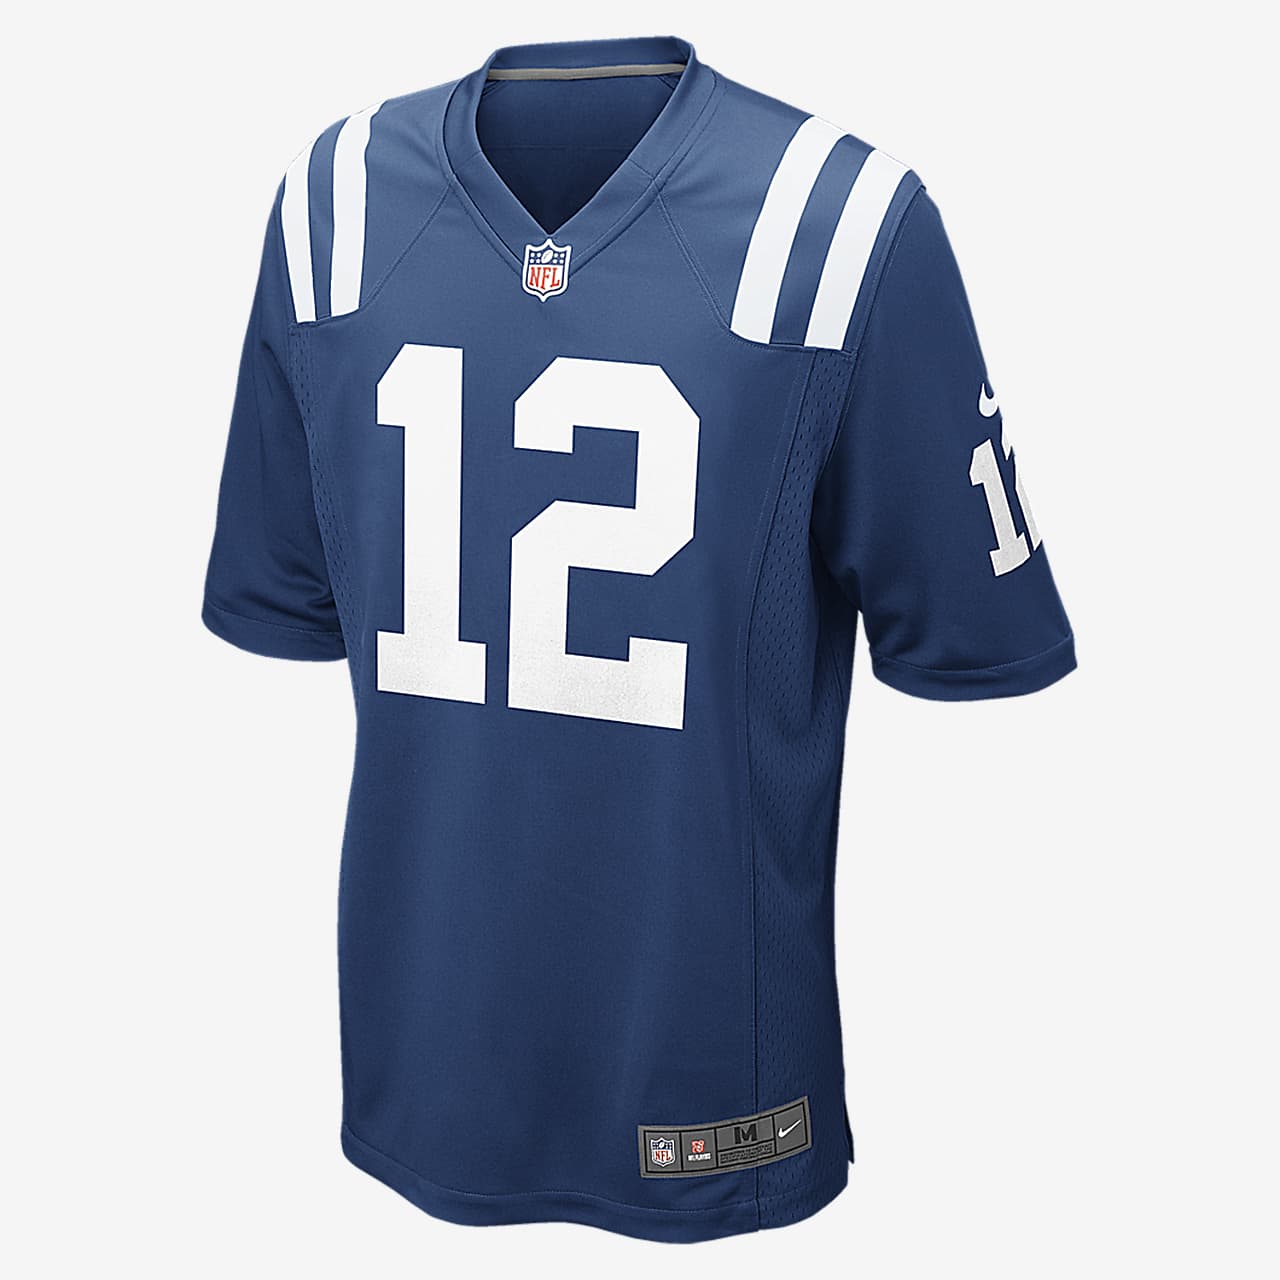 indianapolis colts jersey